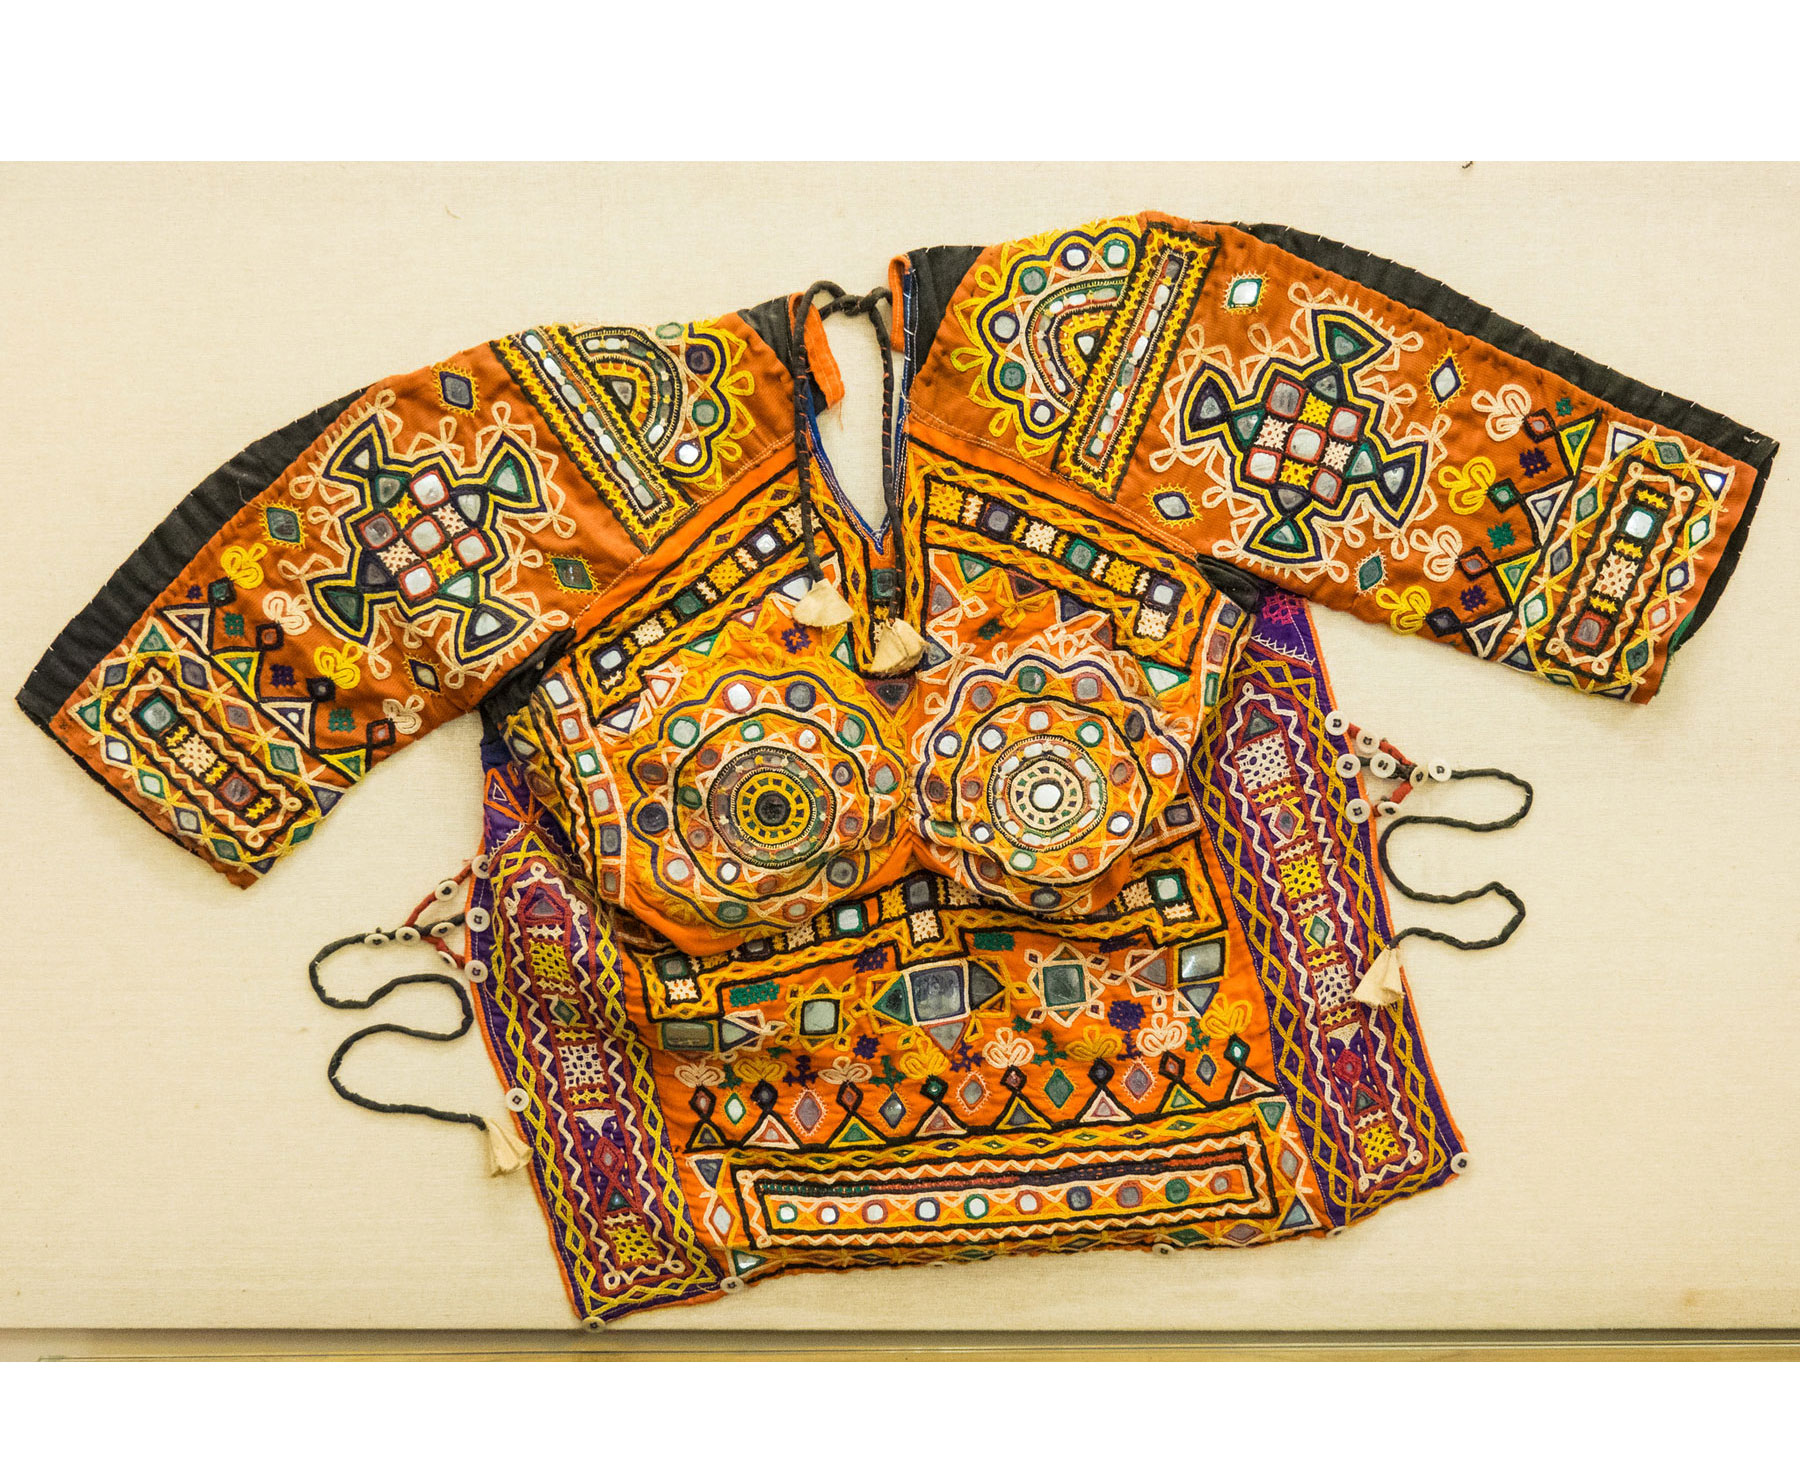 An orange shirt with many colors and decorations embroidered